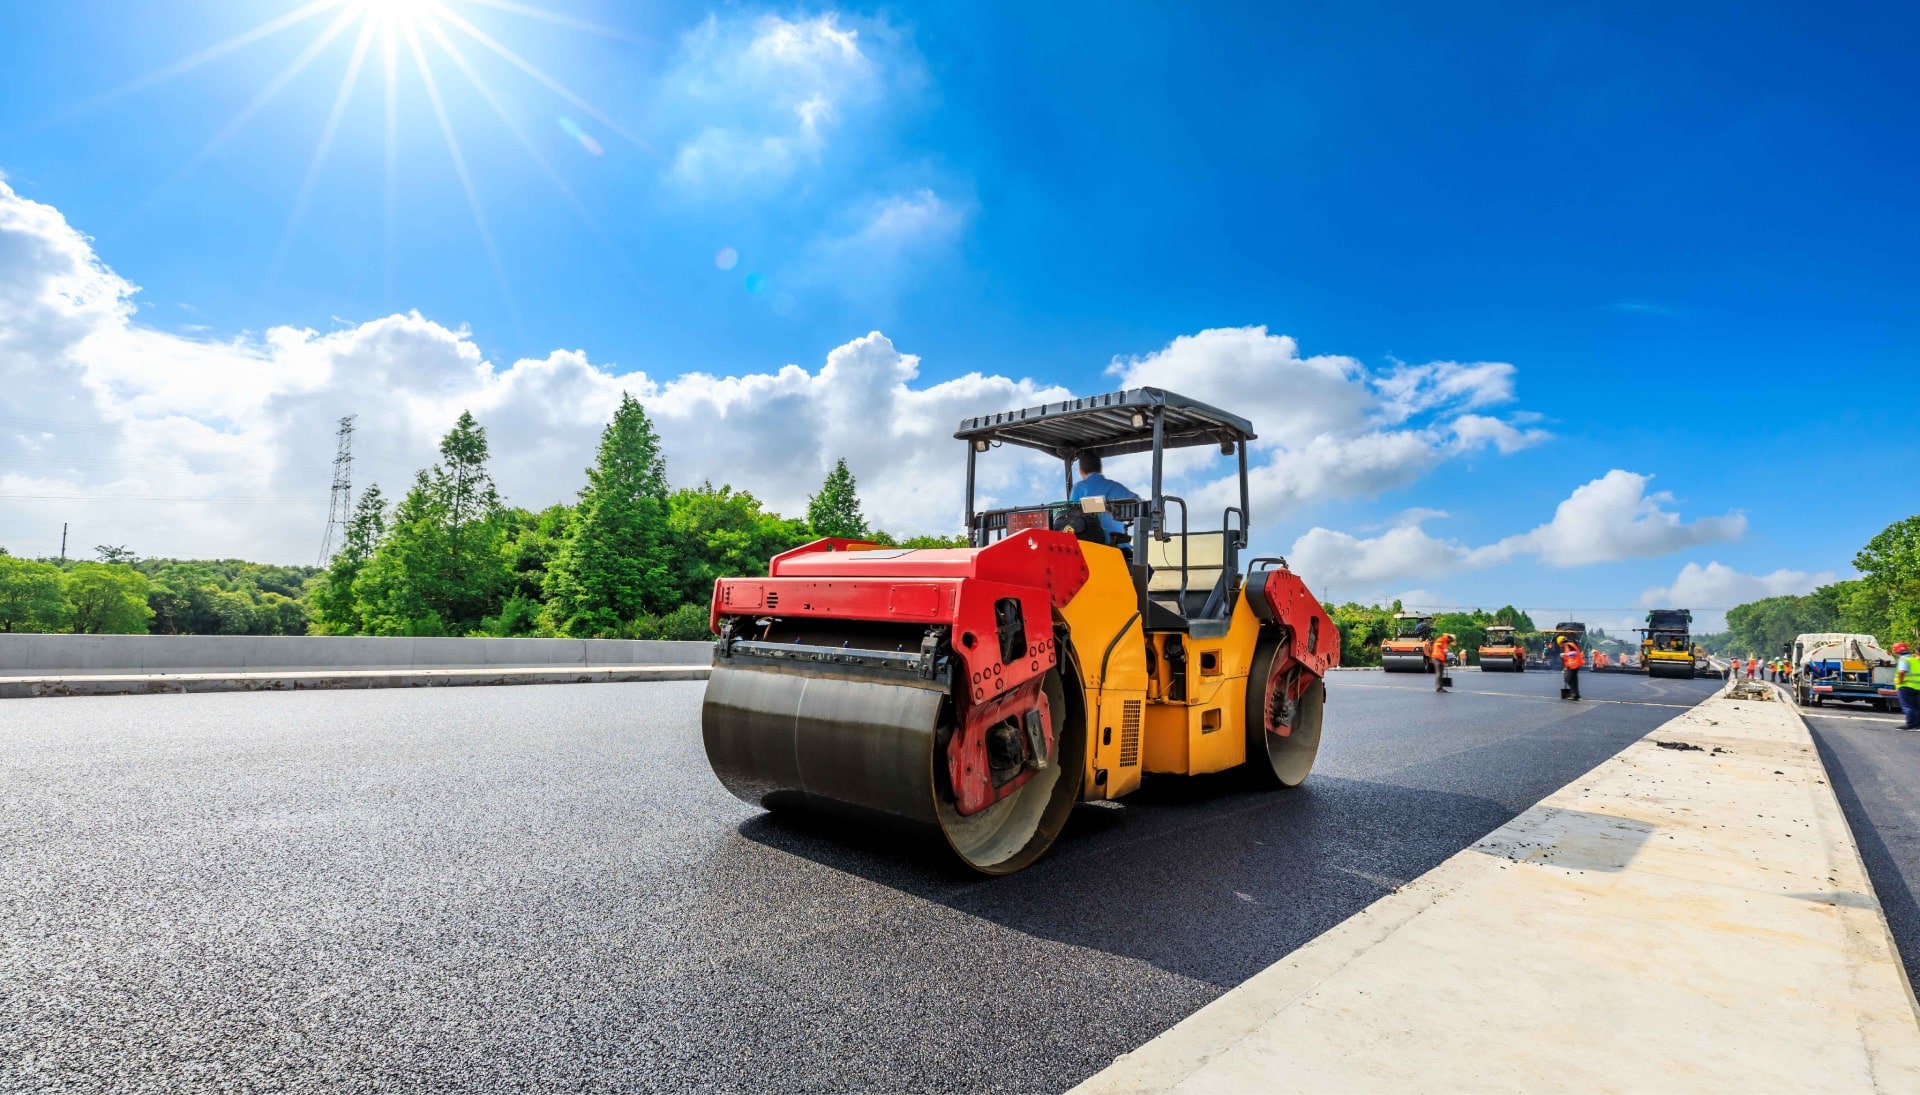 Customize your asphalt paving design with our tailored solutions for unique properties and projects in Houston, TX